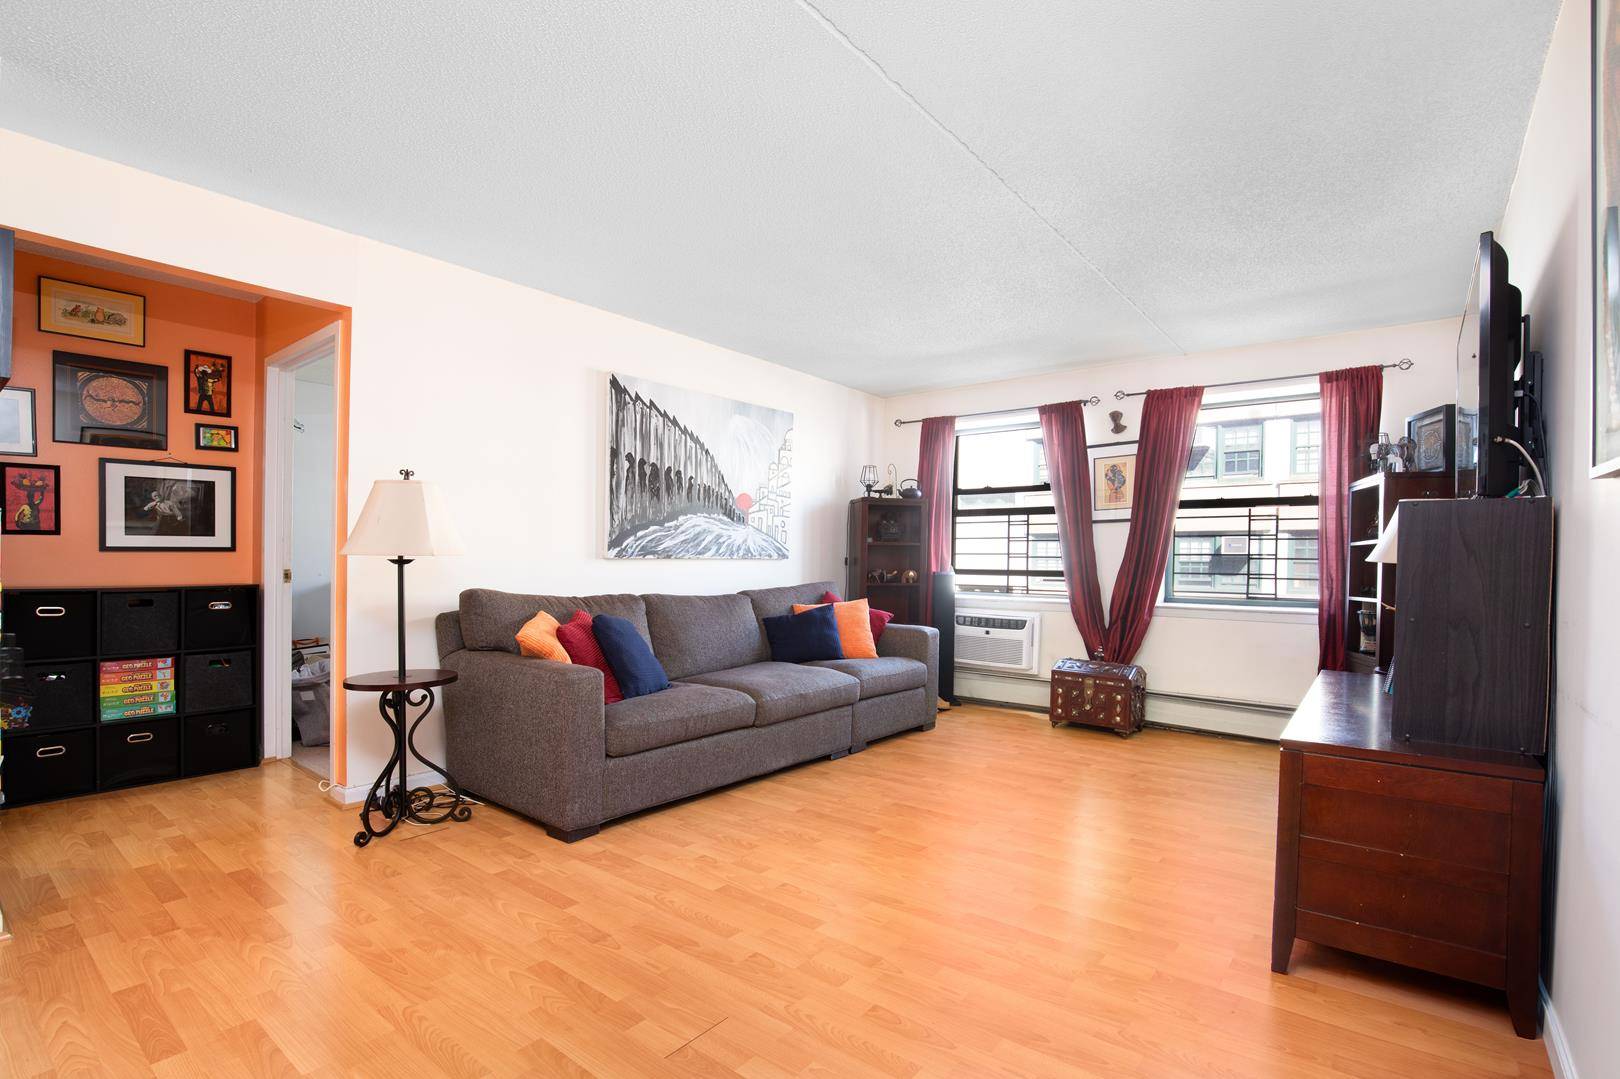 Welcome to 310 at The Renaissance located at the corner of 116th Street and Lenox Avenue.